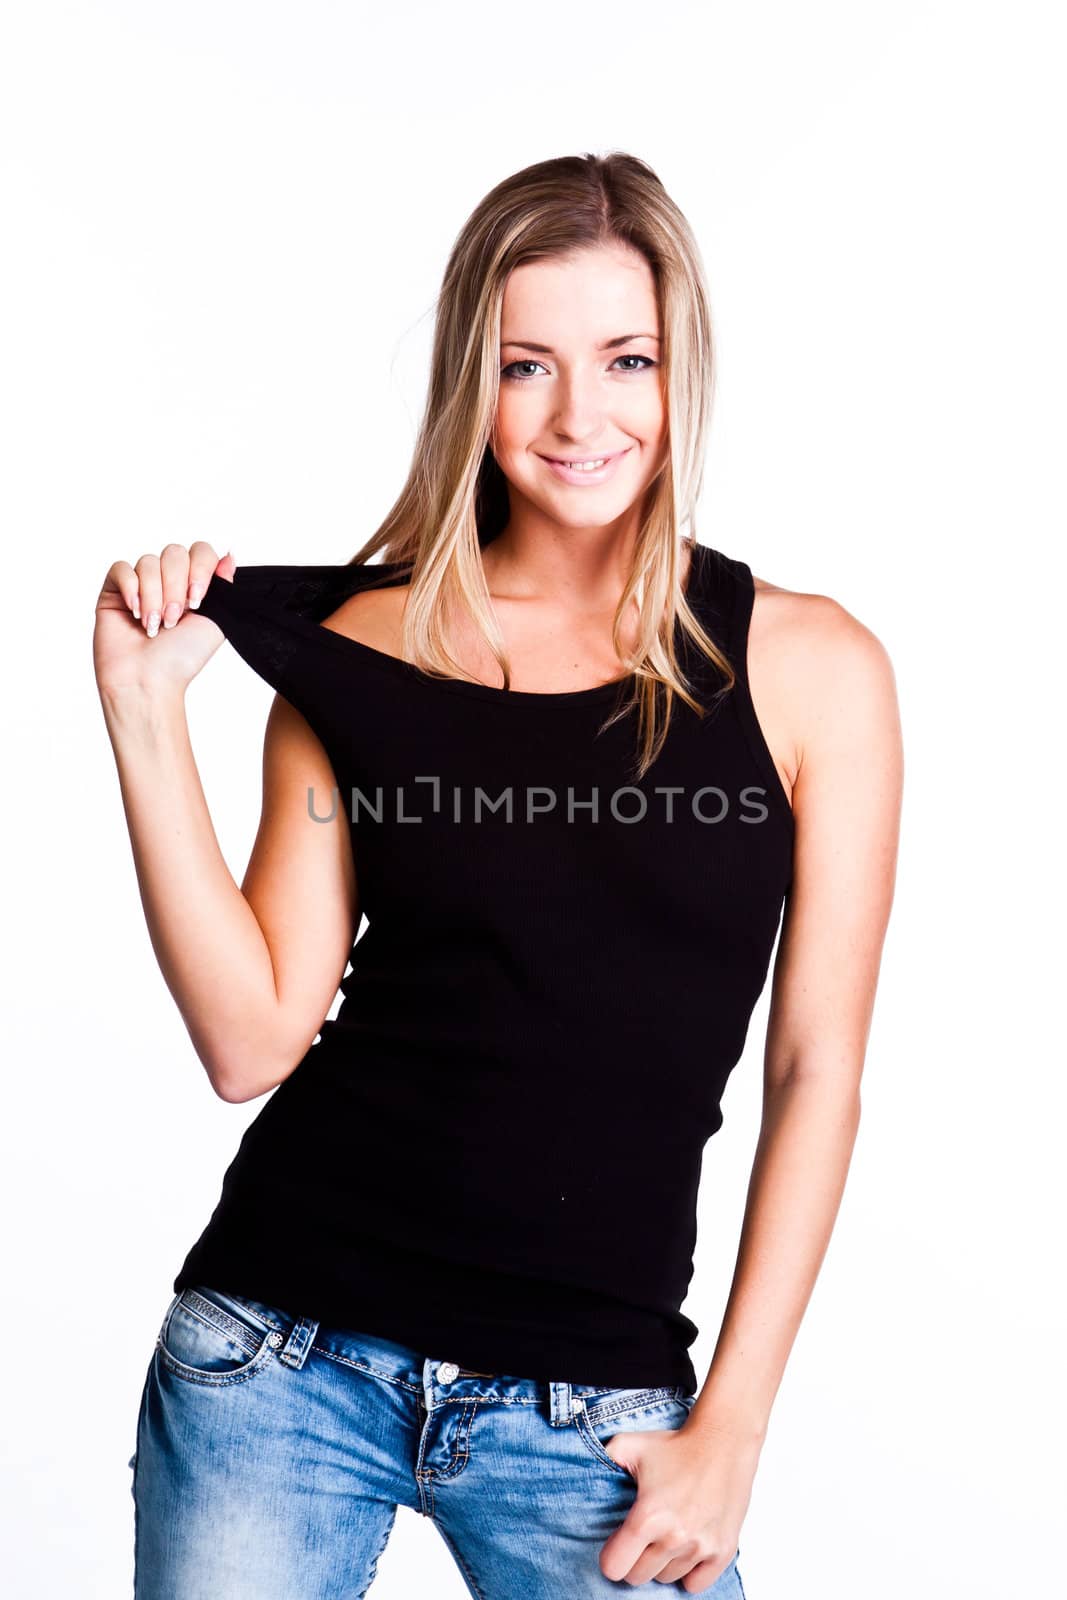 A woman in a black t-shirt by korvin79